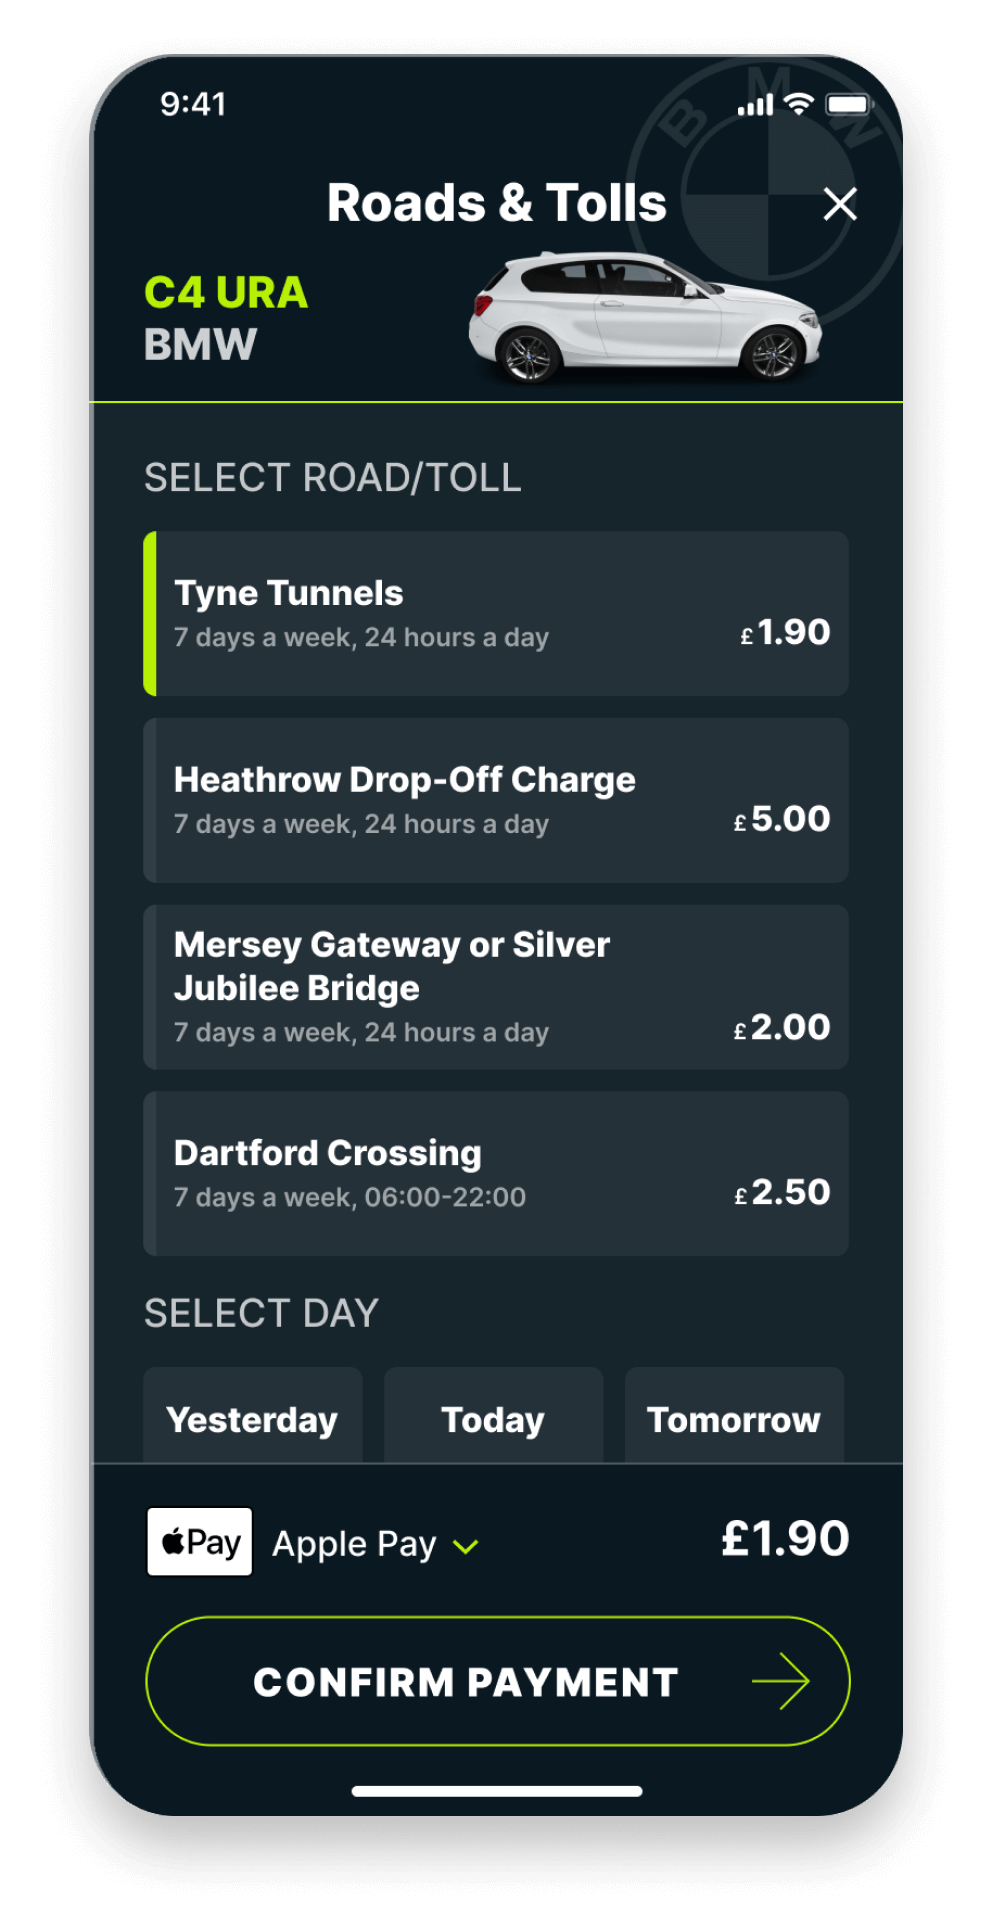 Caura app screen showing Tyne Tunnels payment option